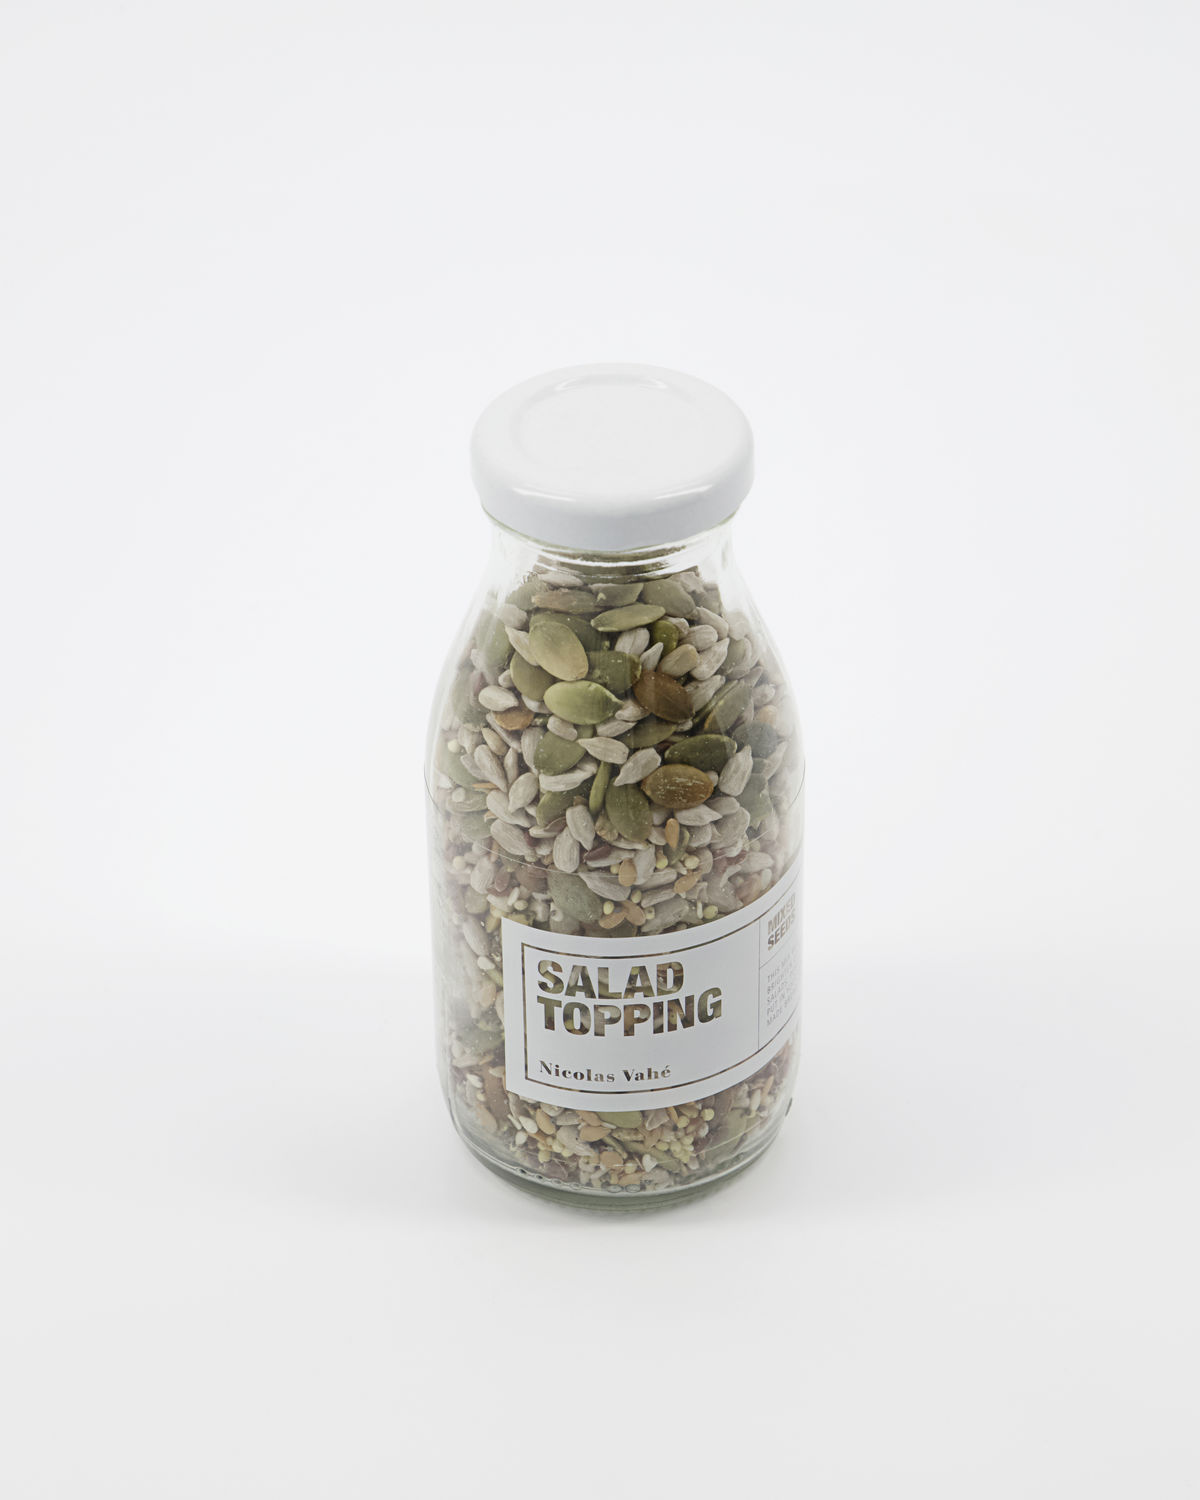 Salad topping, mixed seeds, 170 g.